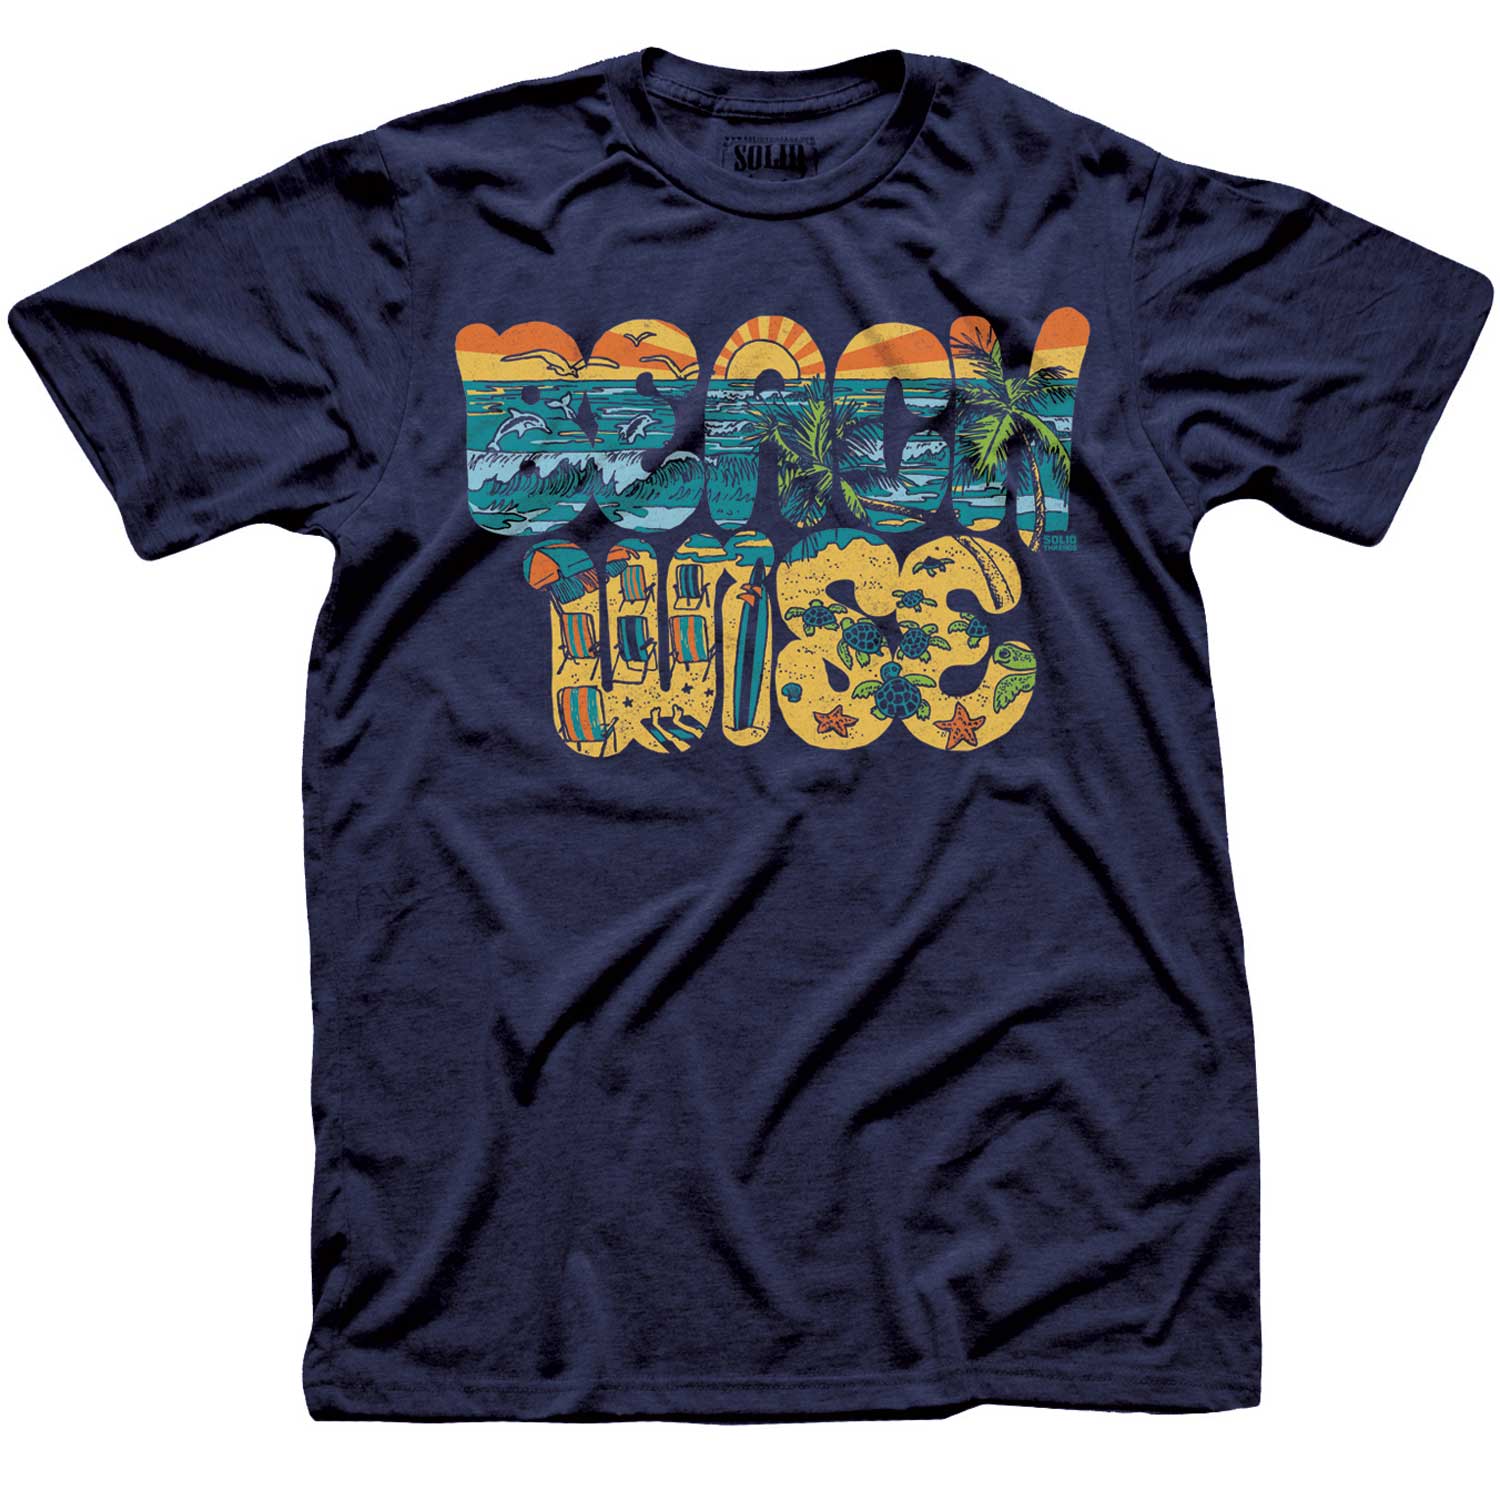 Men's Beach Wise Cool Ocean Graphic T-Shirt | Vintage Surfing Tee | Solid Threads